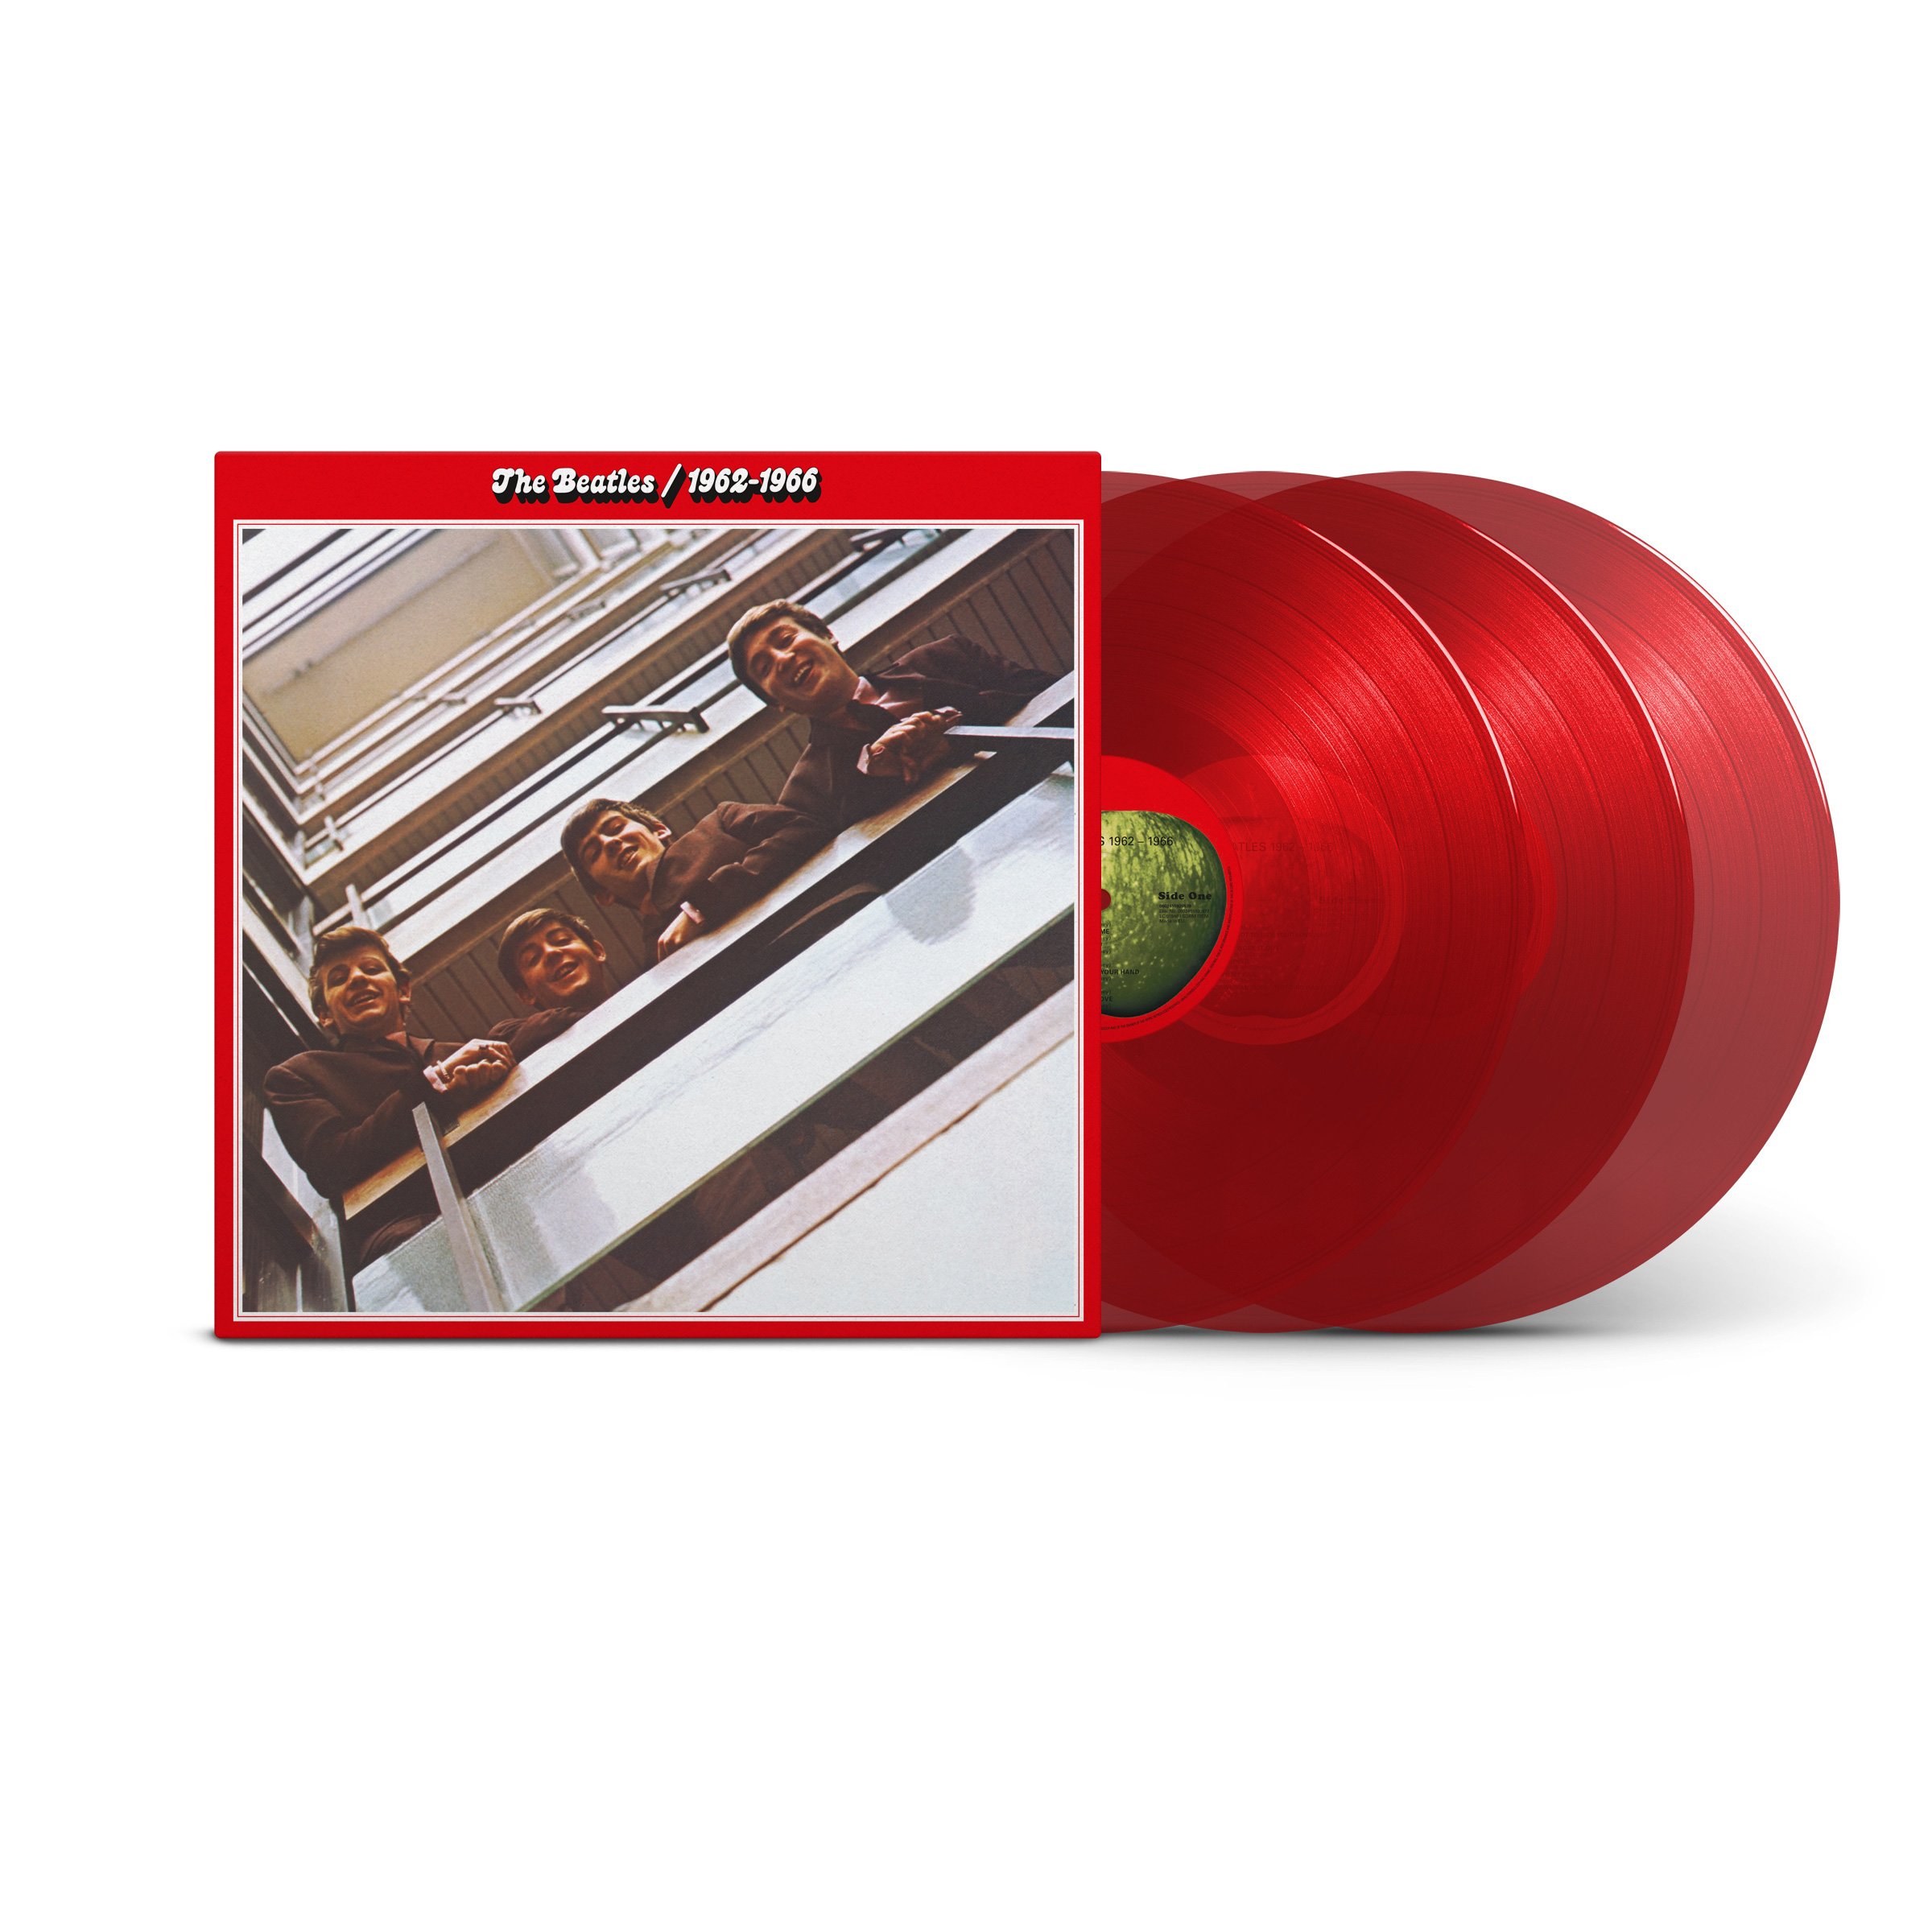 [The Red Album] 3LP RED VINYL EDITION | The Beatles